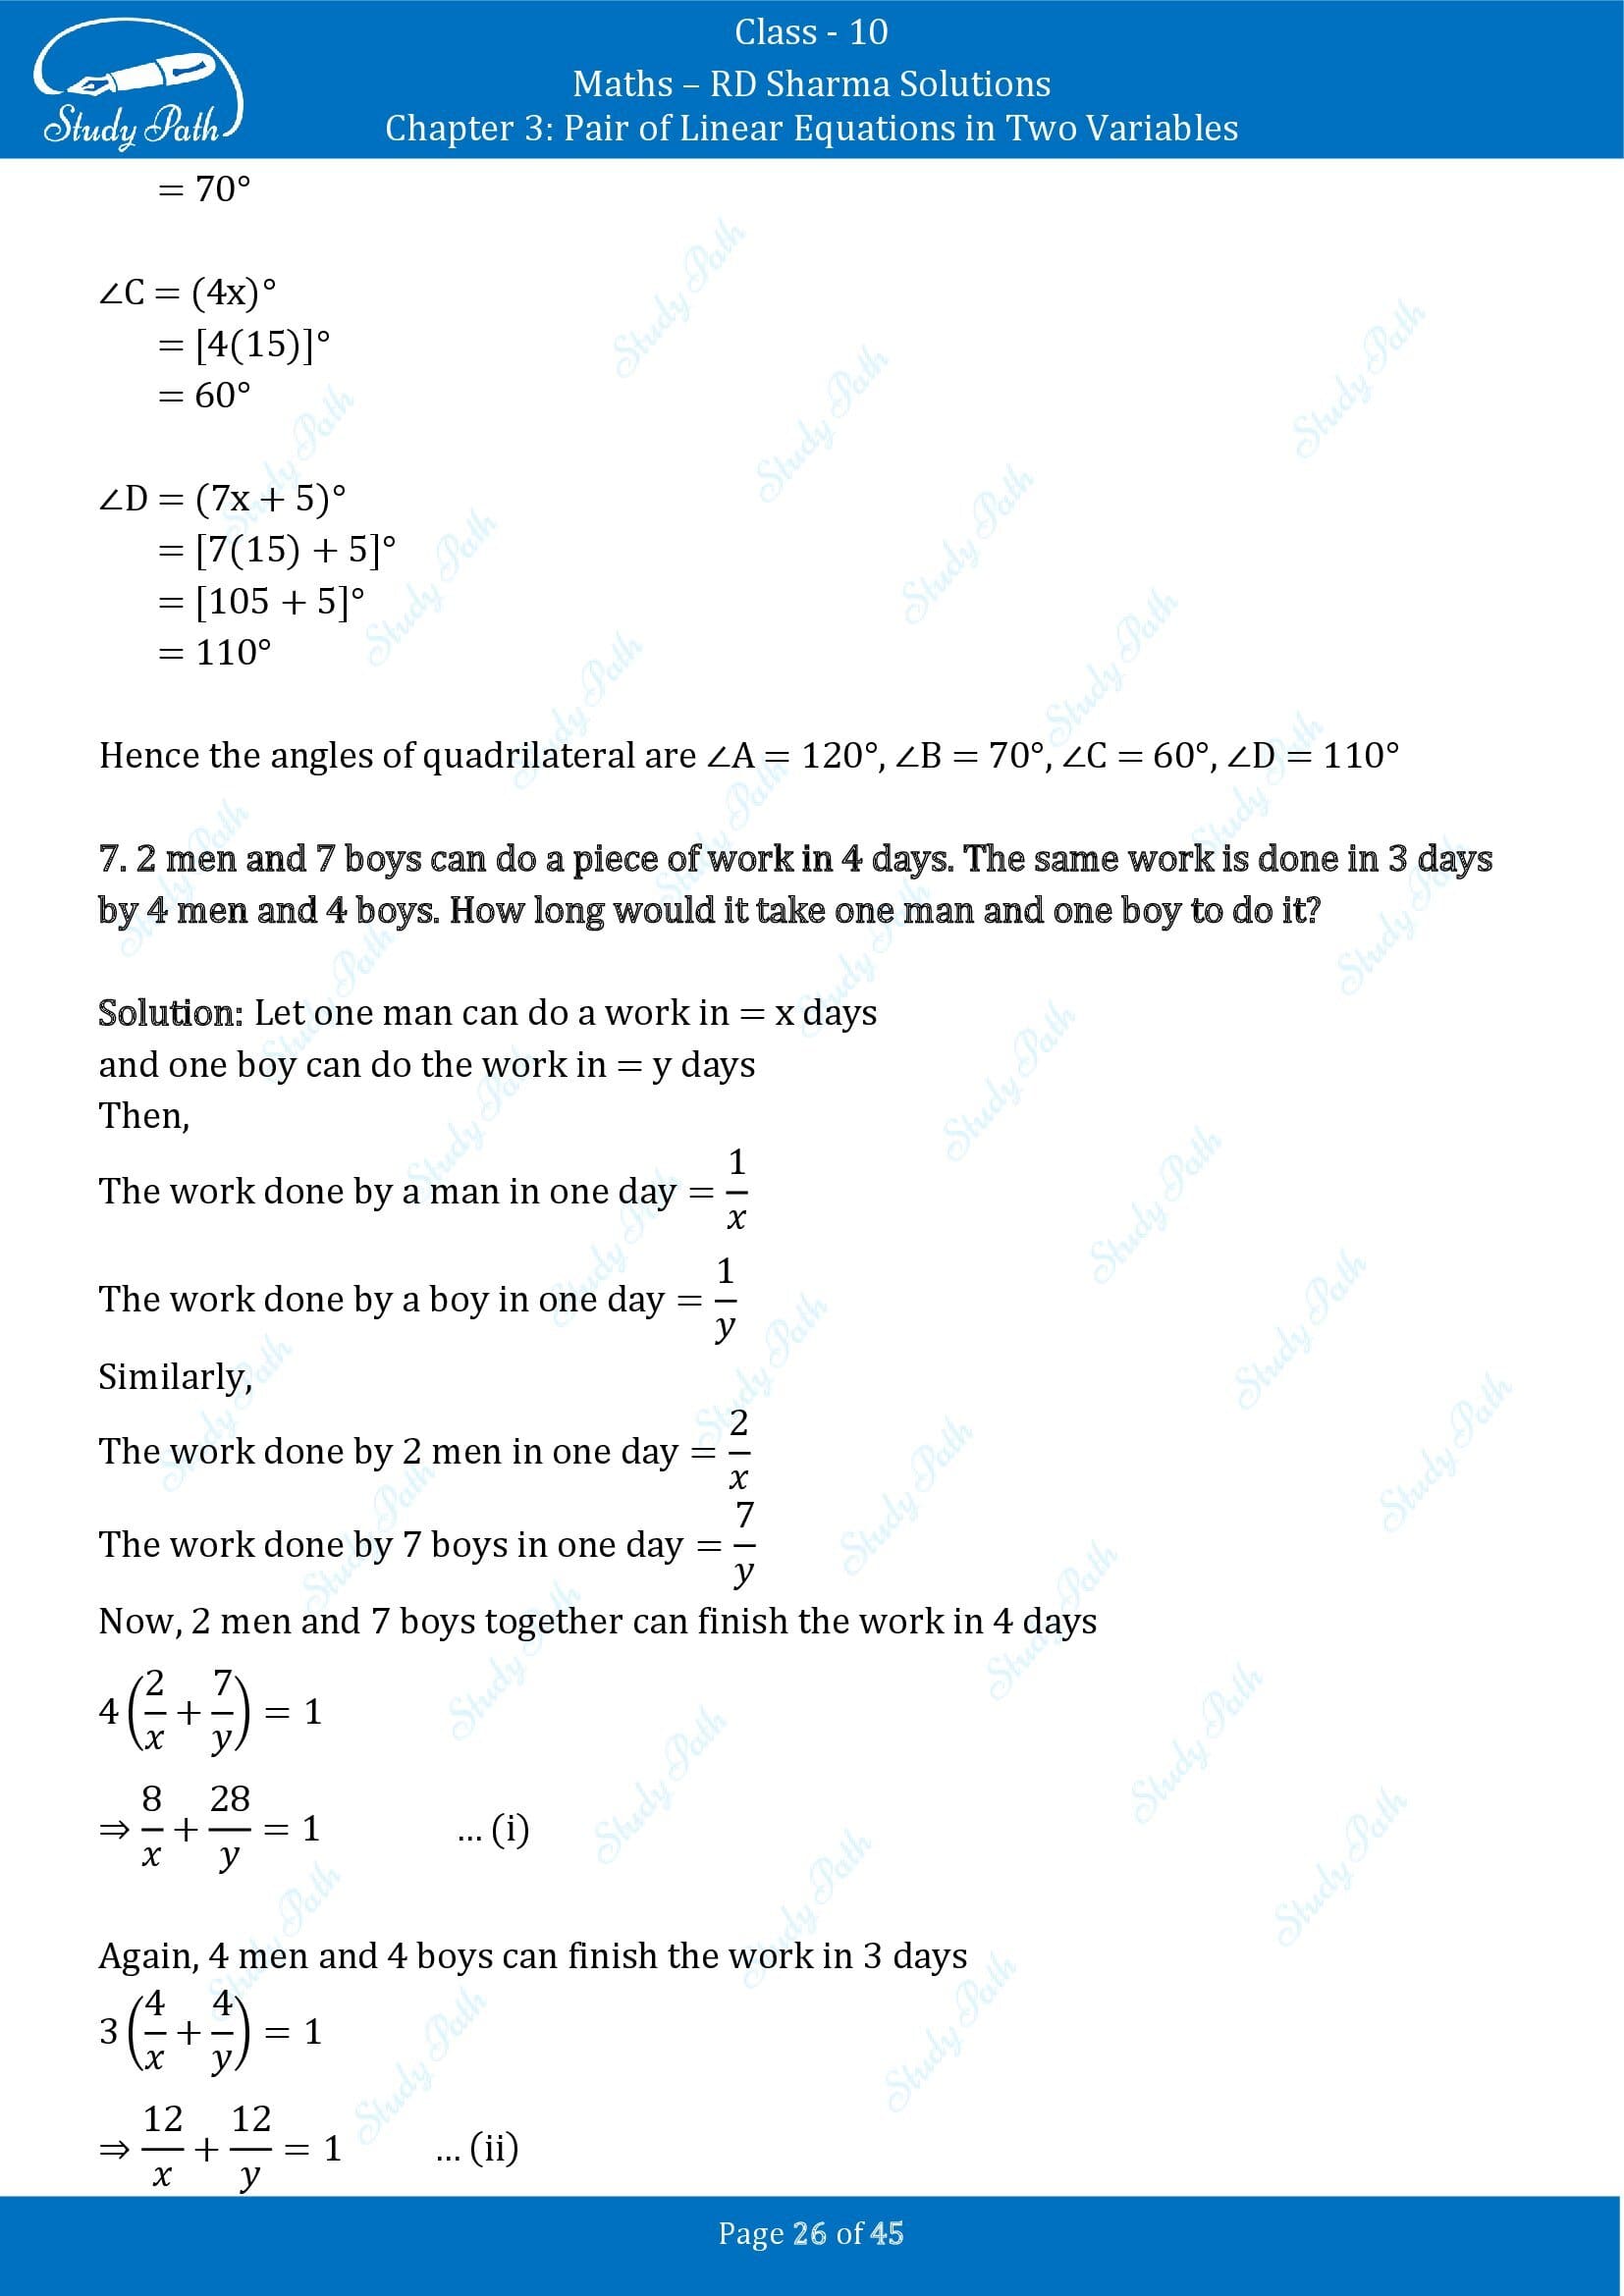 RD Sharma Solutions Class 10 Chapter 3 Pair of Linear Equations in Two Variables Exercise 3.11 00026